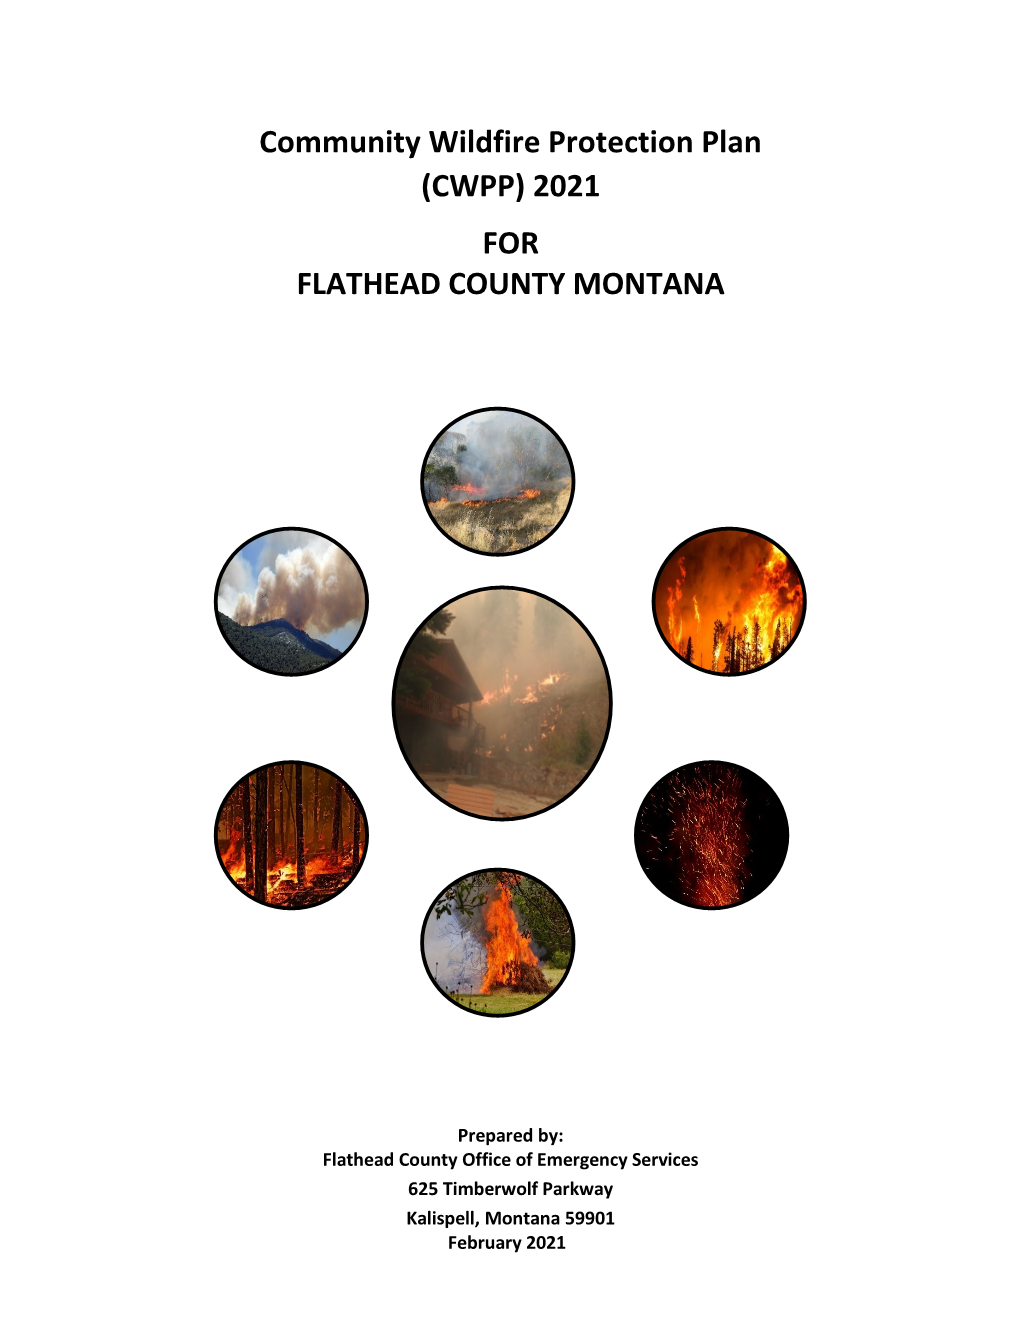 Community Wildfire Protection Plan (CWPP) 2021 for FLATHEAD COUNTY MONTANA